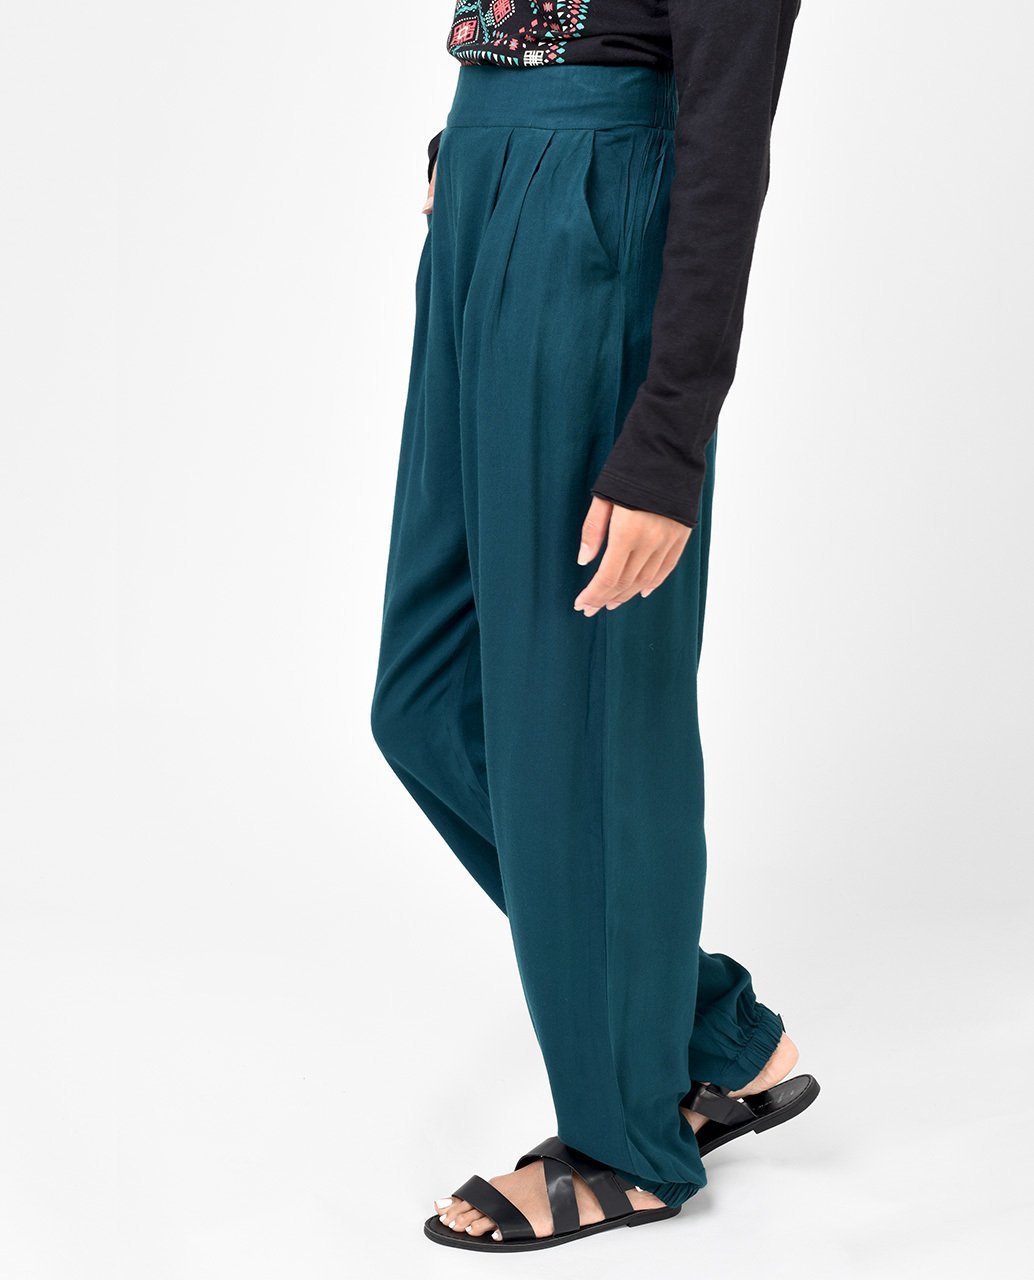 Teal Green Rayon Loose Fit Trousers Slim Petite (W28 L28) 